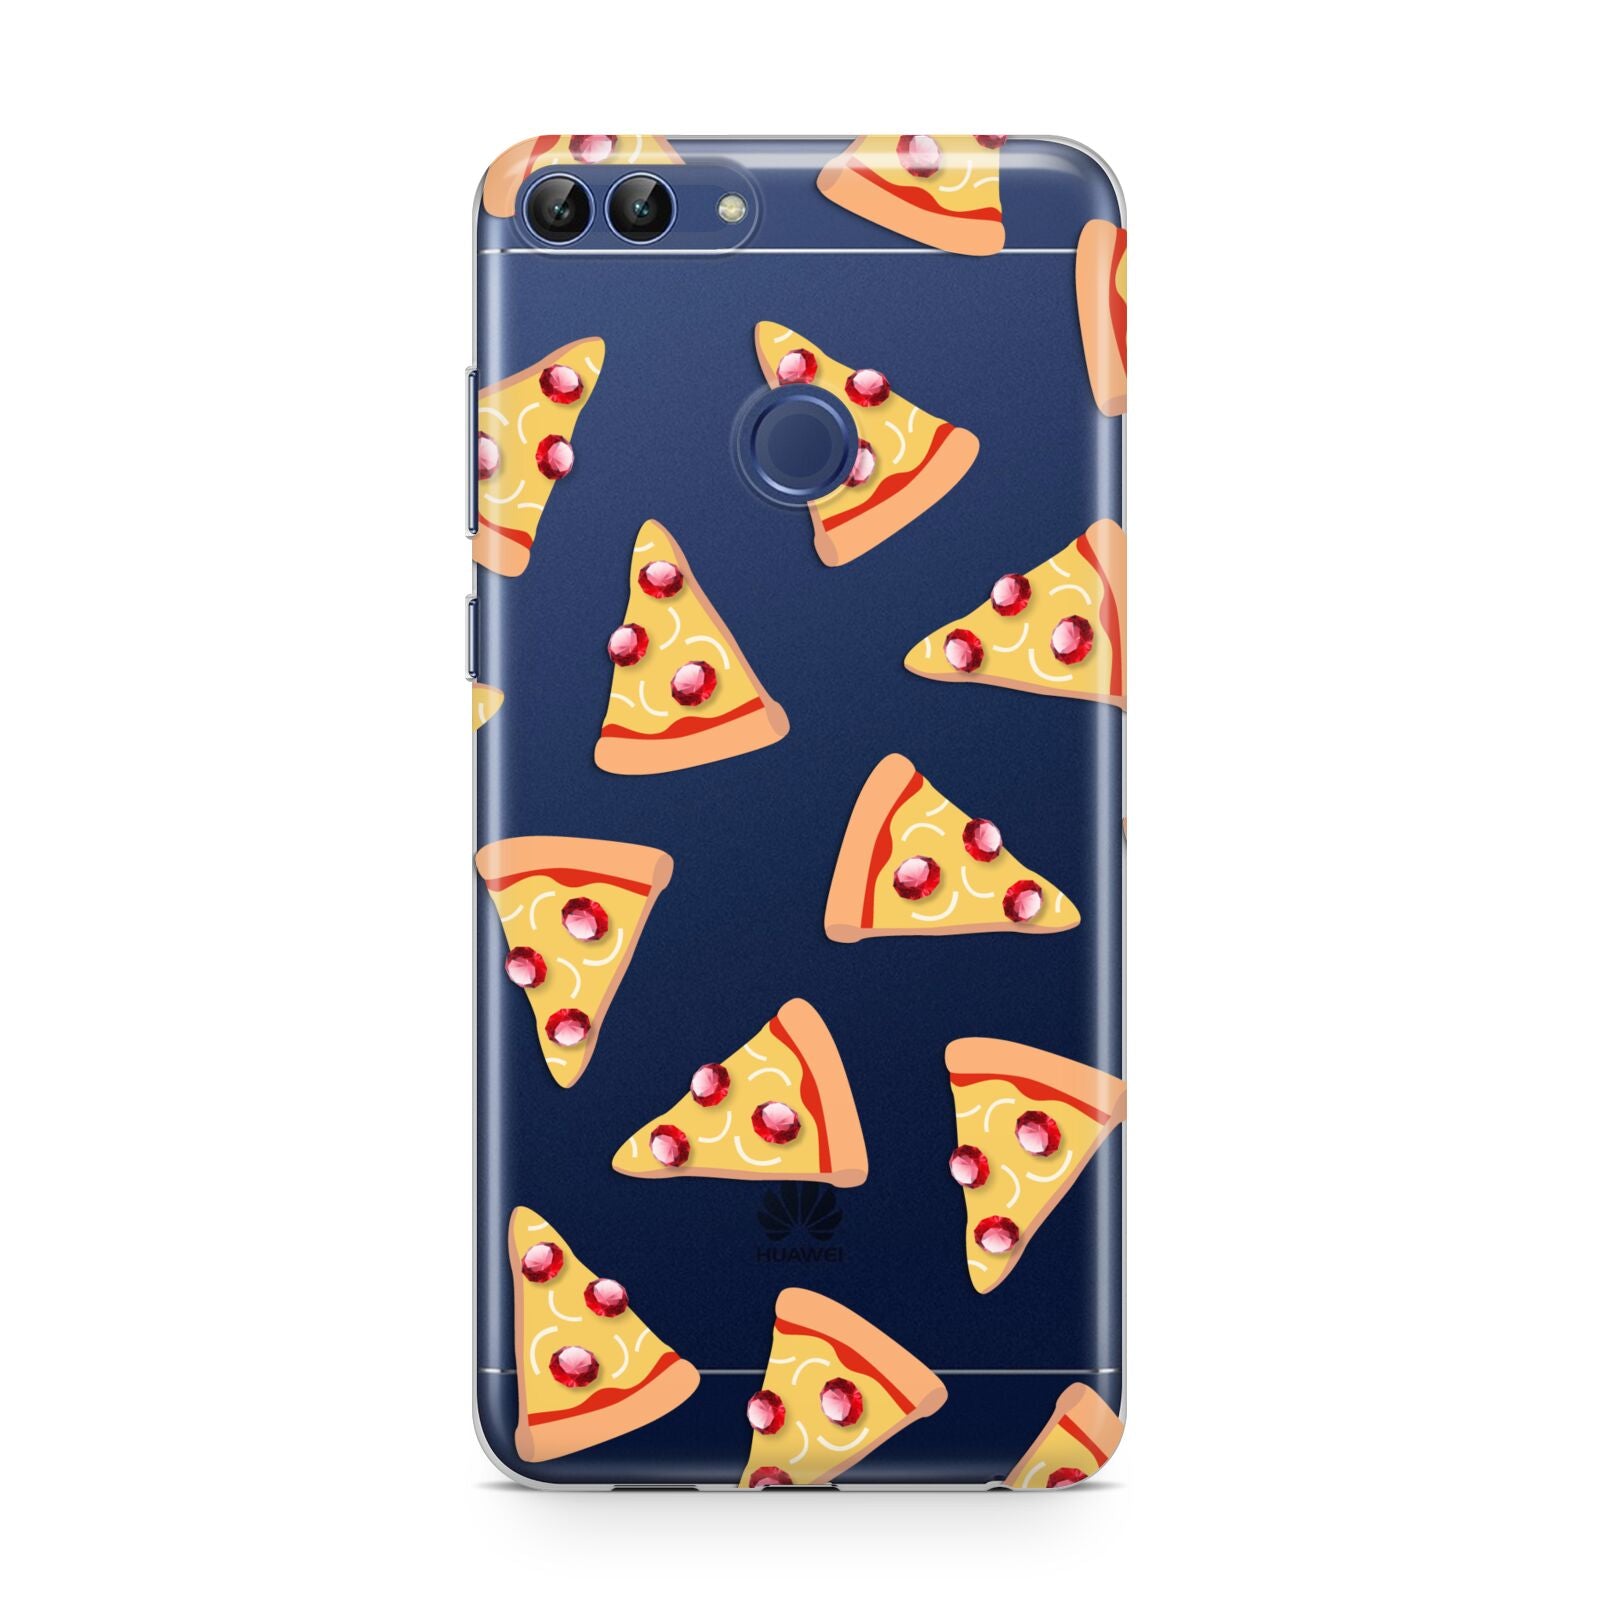 Rubies on Cartoon Pizza Slices Huawei P Smart Case